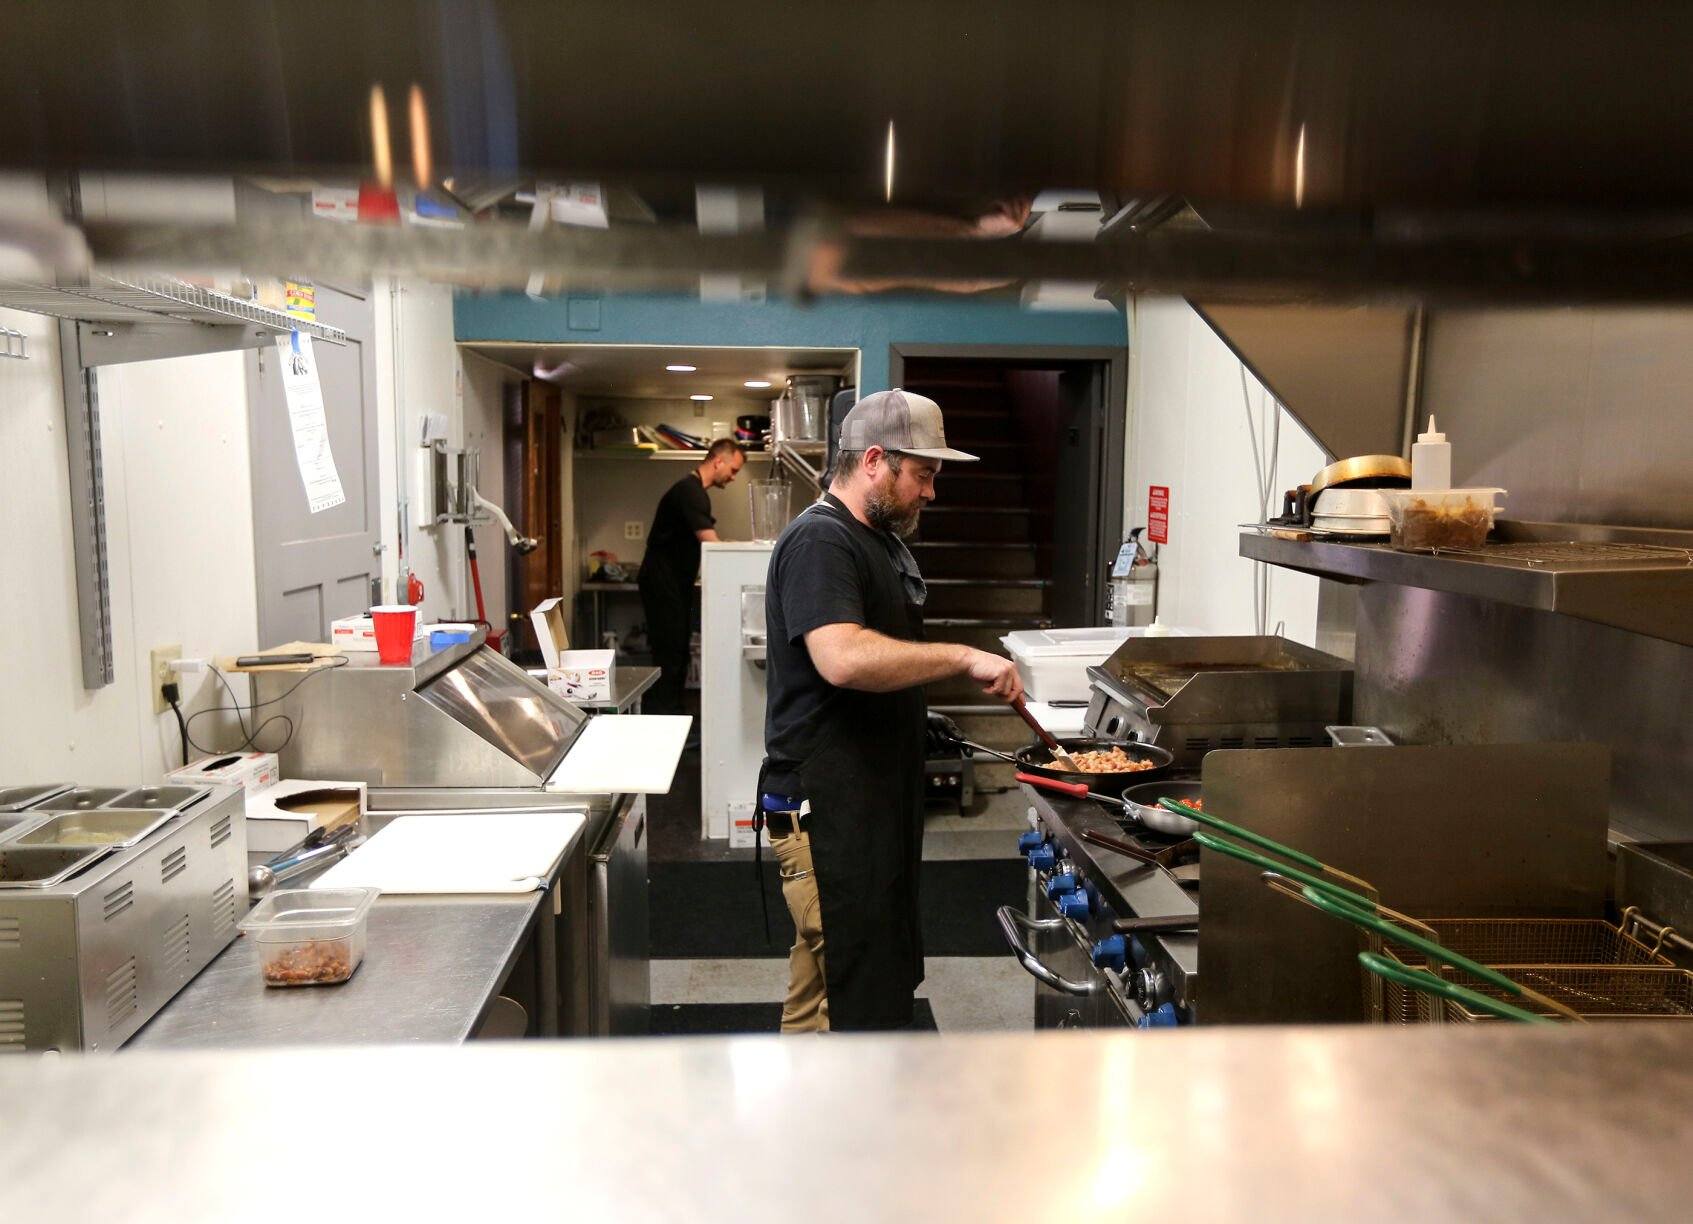 Nate Ternes who is the head chef at the Kitchen Brigade cooks food in the kitchen of the Fox Den Motel on Friday, April 14, 2023.    PHOTO CREDIT: Dave Kettering